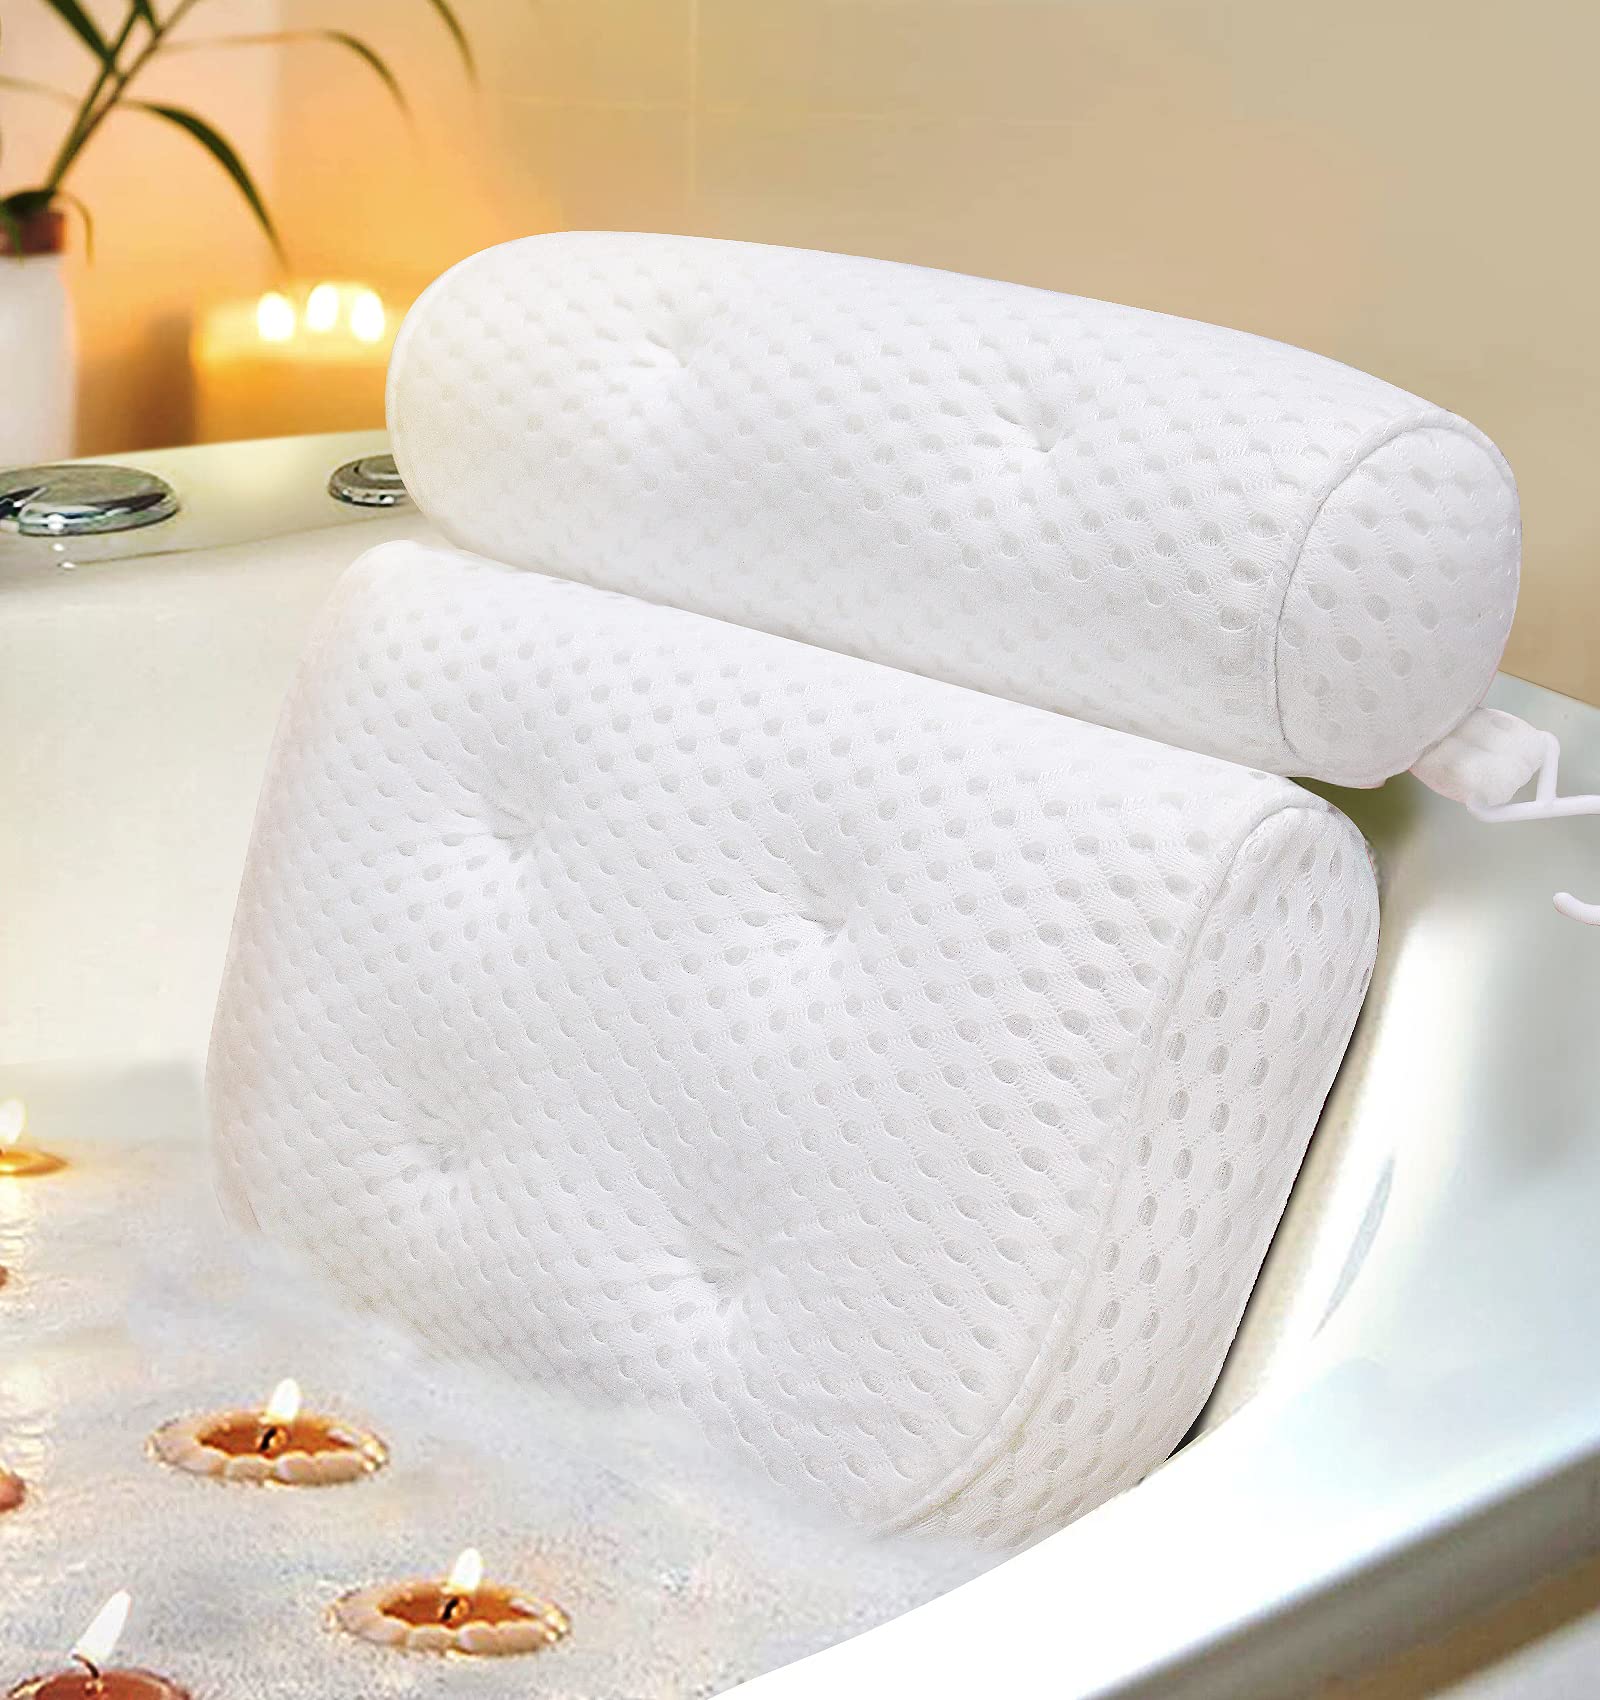 Bath Pillow, Bathtub Pillow with Anti-Slip Suction Cups, 4D Mesh Soft Spa Bath  Tub Pillow, Bath Pillows for Tub with Neck and Back Support Fits Bathtub  Spa Tub Jacuzzi, Fathers Day Dad